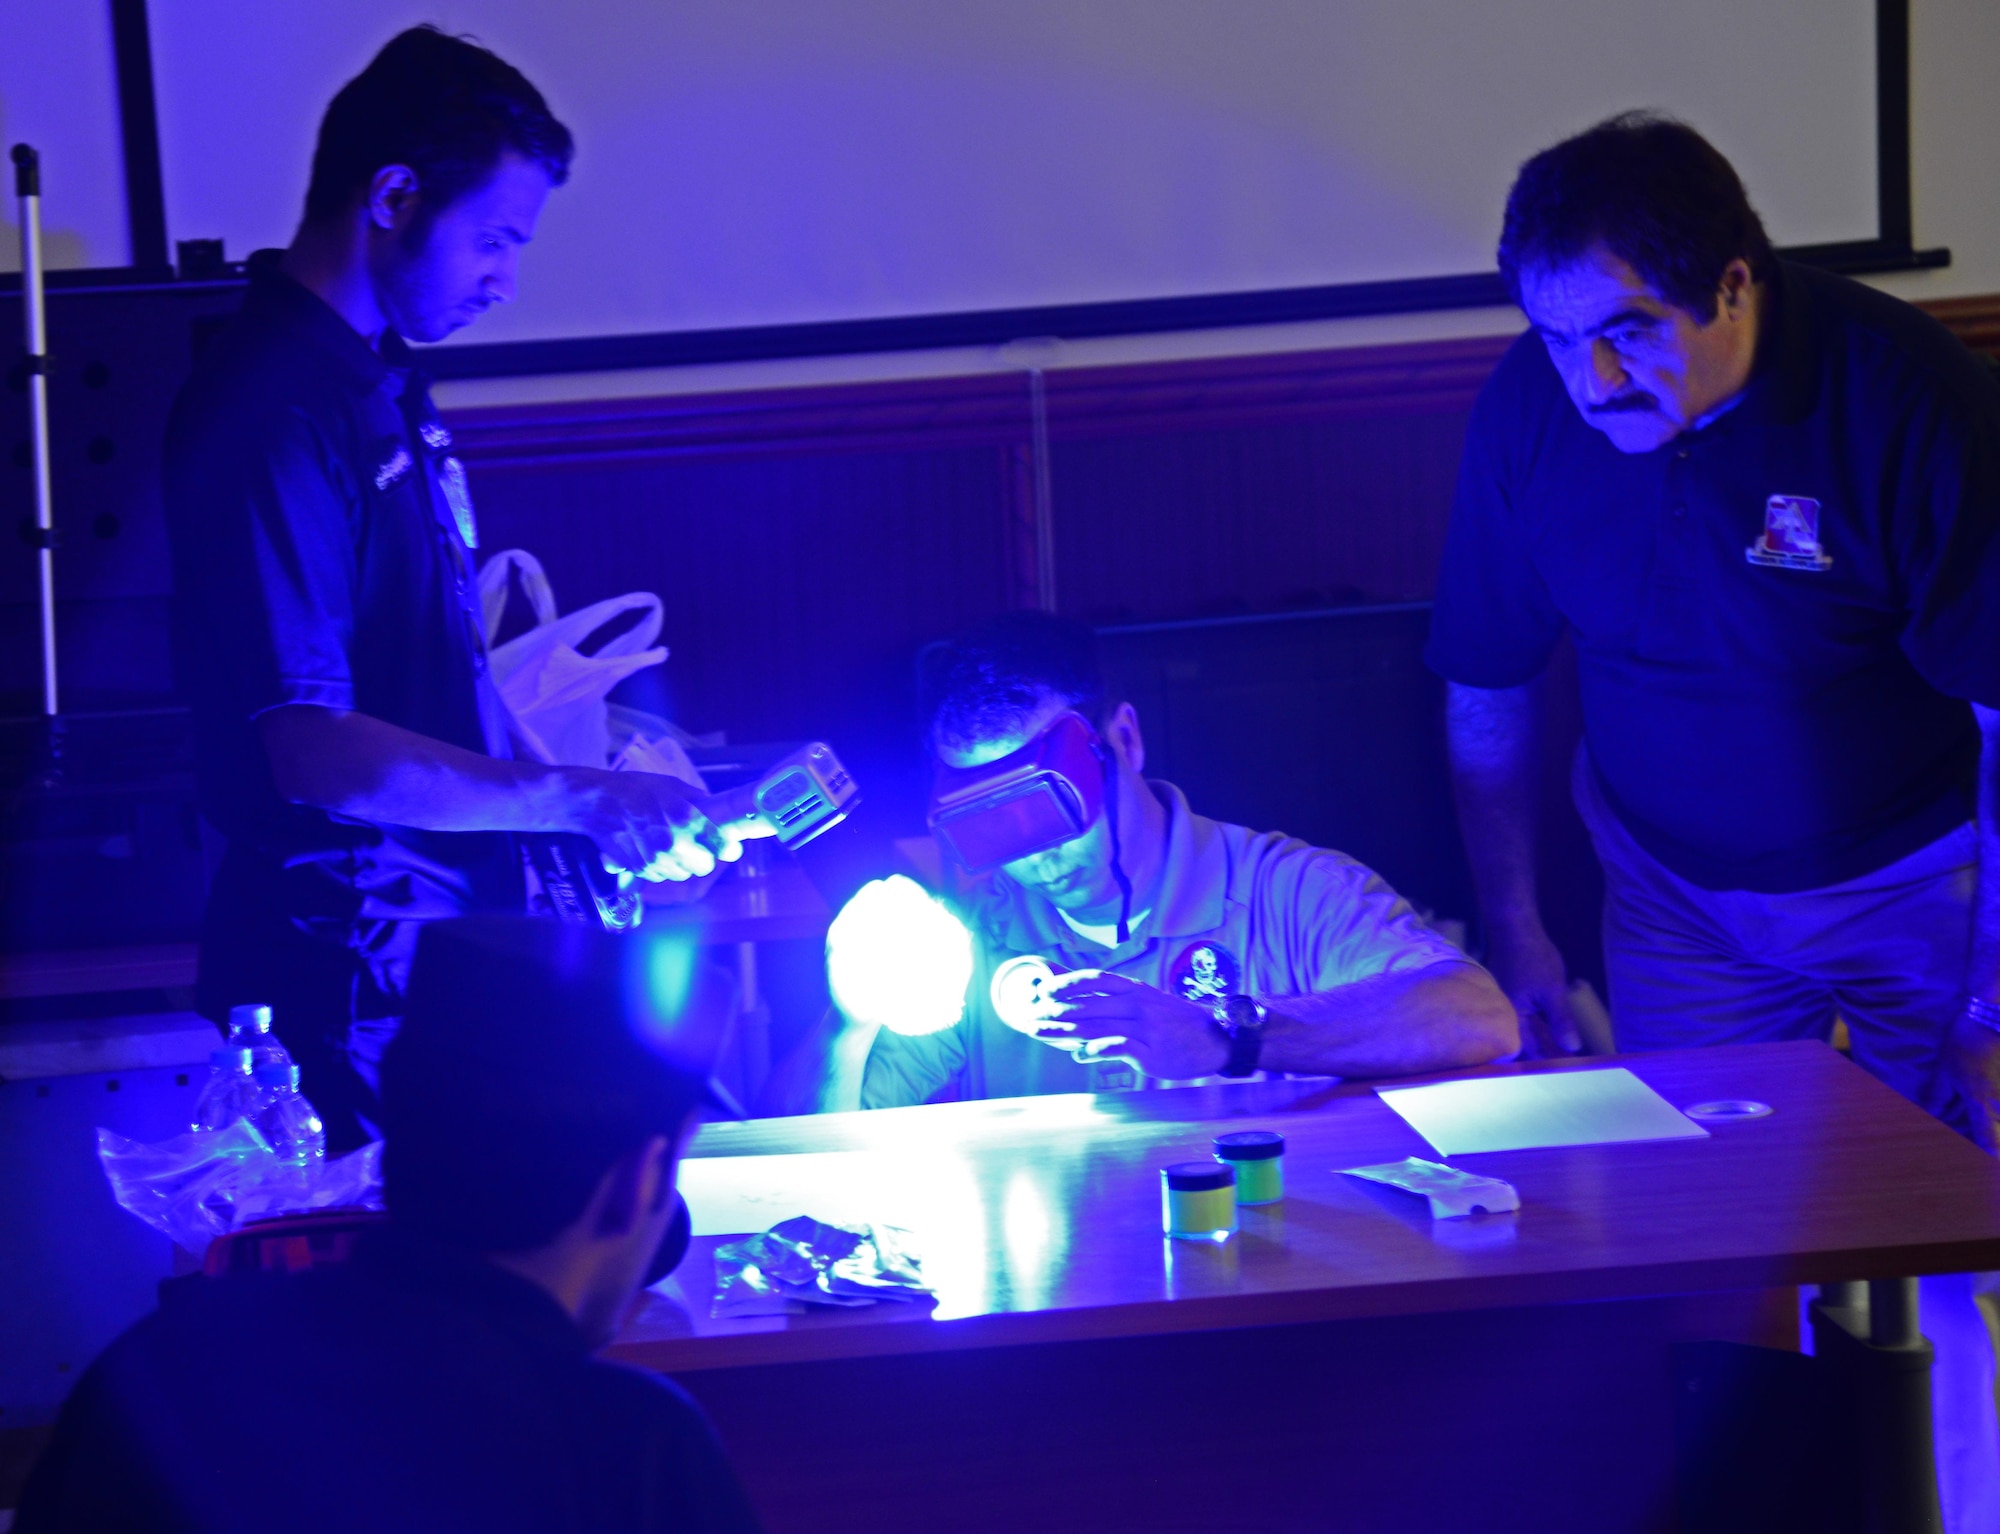 U.S. Special Agent Chad Hutchins, center, Forensics Science Consultant from the Federal Law Enforcement Training Center in Brunswick, Ga., looks at a can which he dusted with neon fingerprint powder to enhance a fingerprint during a liaison exchange, March 3, 2015, at the Criminal Evidence and Information Department, Ar-Rayyan, Qatar.  During the liaison exchange, members from Air Force Office of Special Investigations Detachment 241 and their Qatari counterparts exchanged different forensic methods they use when investigating a crime scene. Fingerprint powders have various formulations, and the appropriate powder must be used on the appropriate surface. For example, dark colored powders will show up a fingerprint far better on a light surface. (U.S. Air Force photo by Senior Airman Kia Atkins)